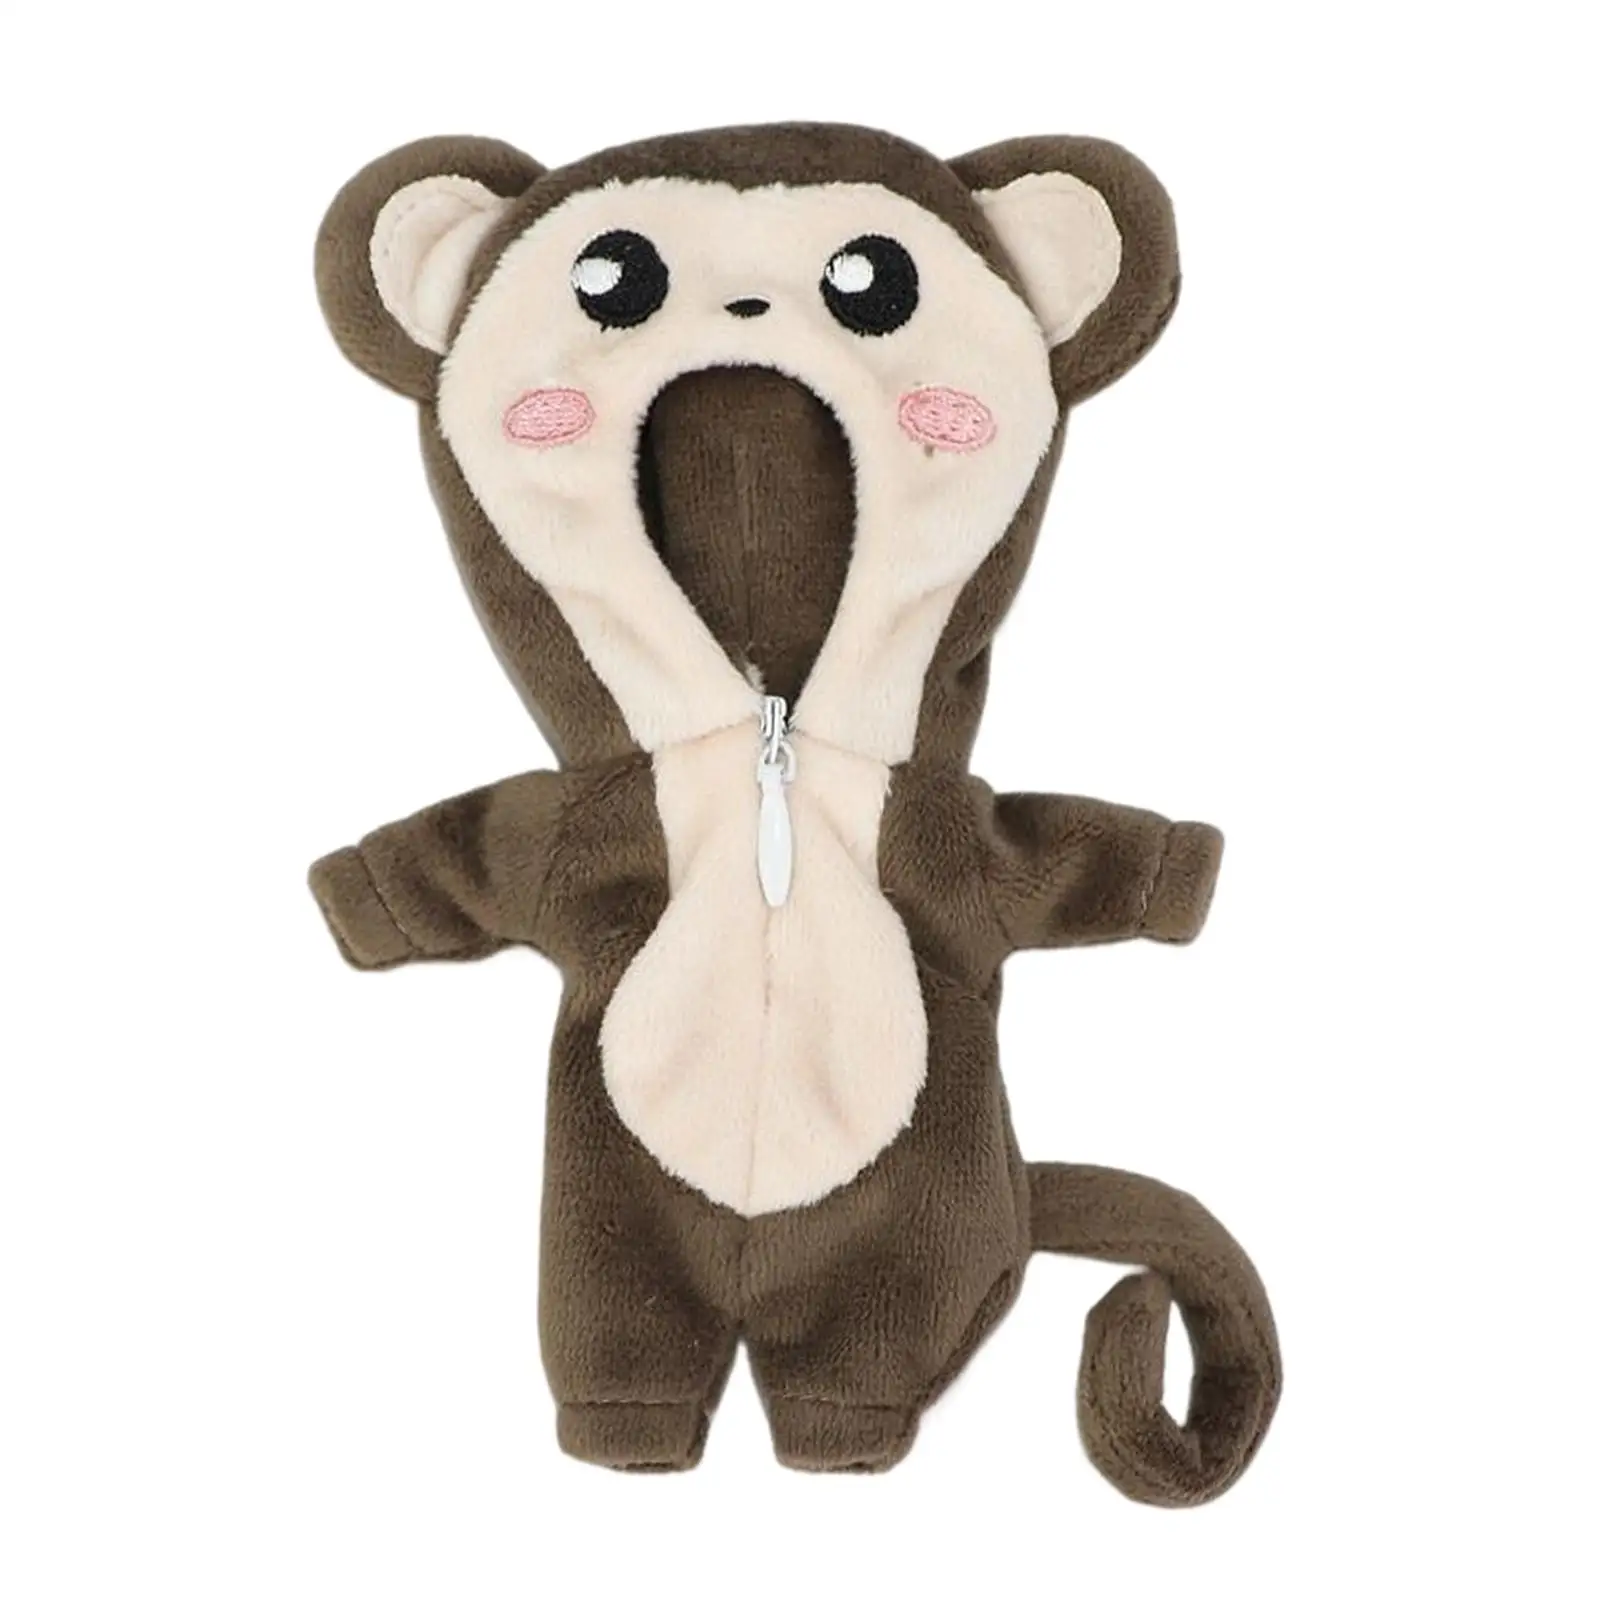 Plush  Doll Clothing 1/12 Doll Animal Shaped  Accessories Zipper Design Party Favor Cosplay Costume Doll Bodysuit for Ob11 Boys